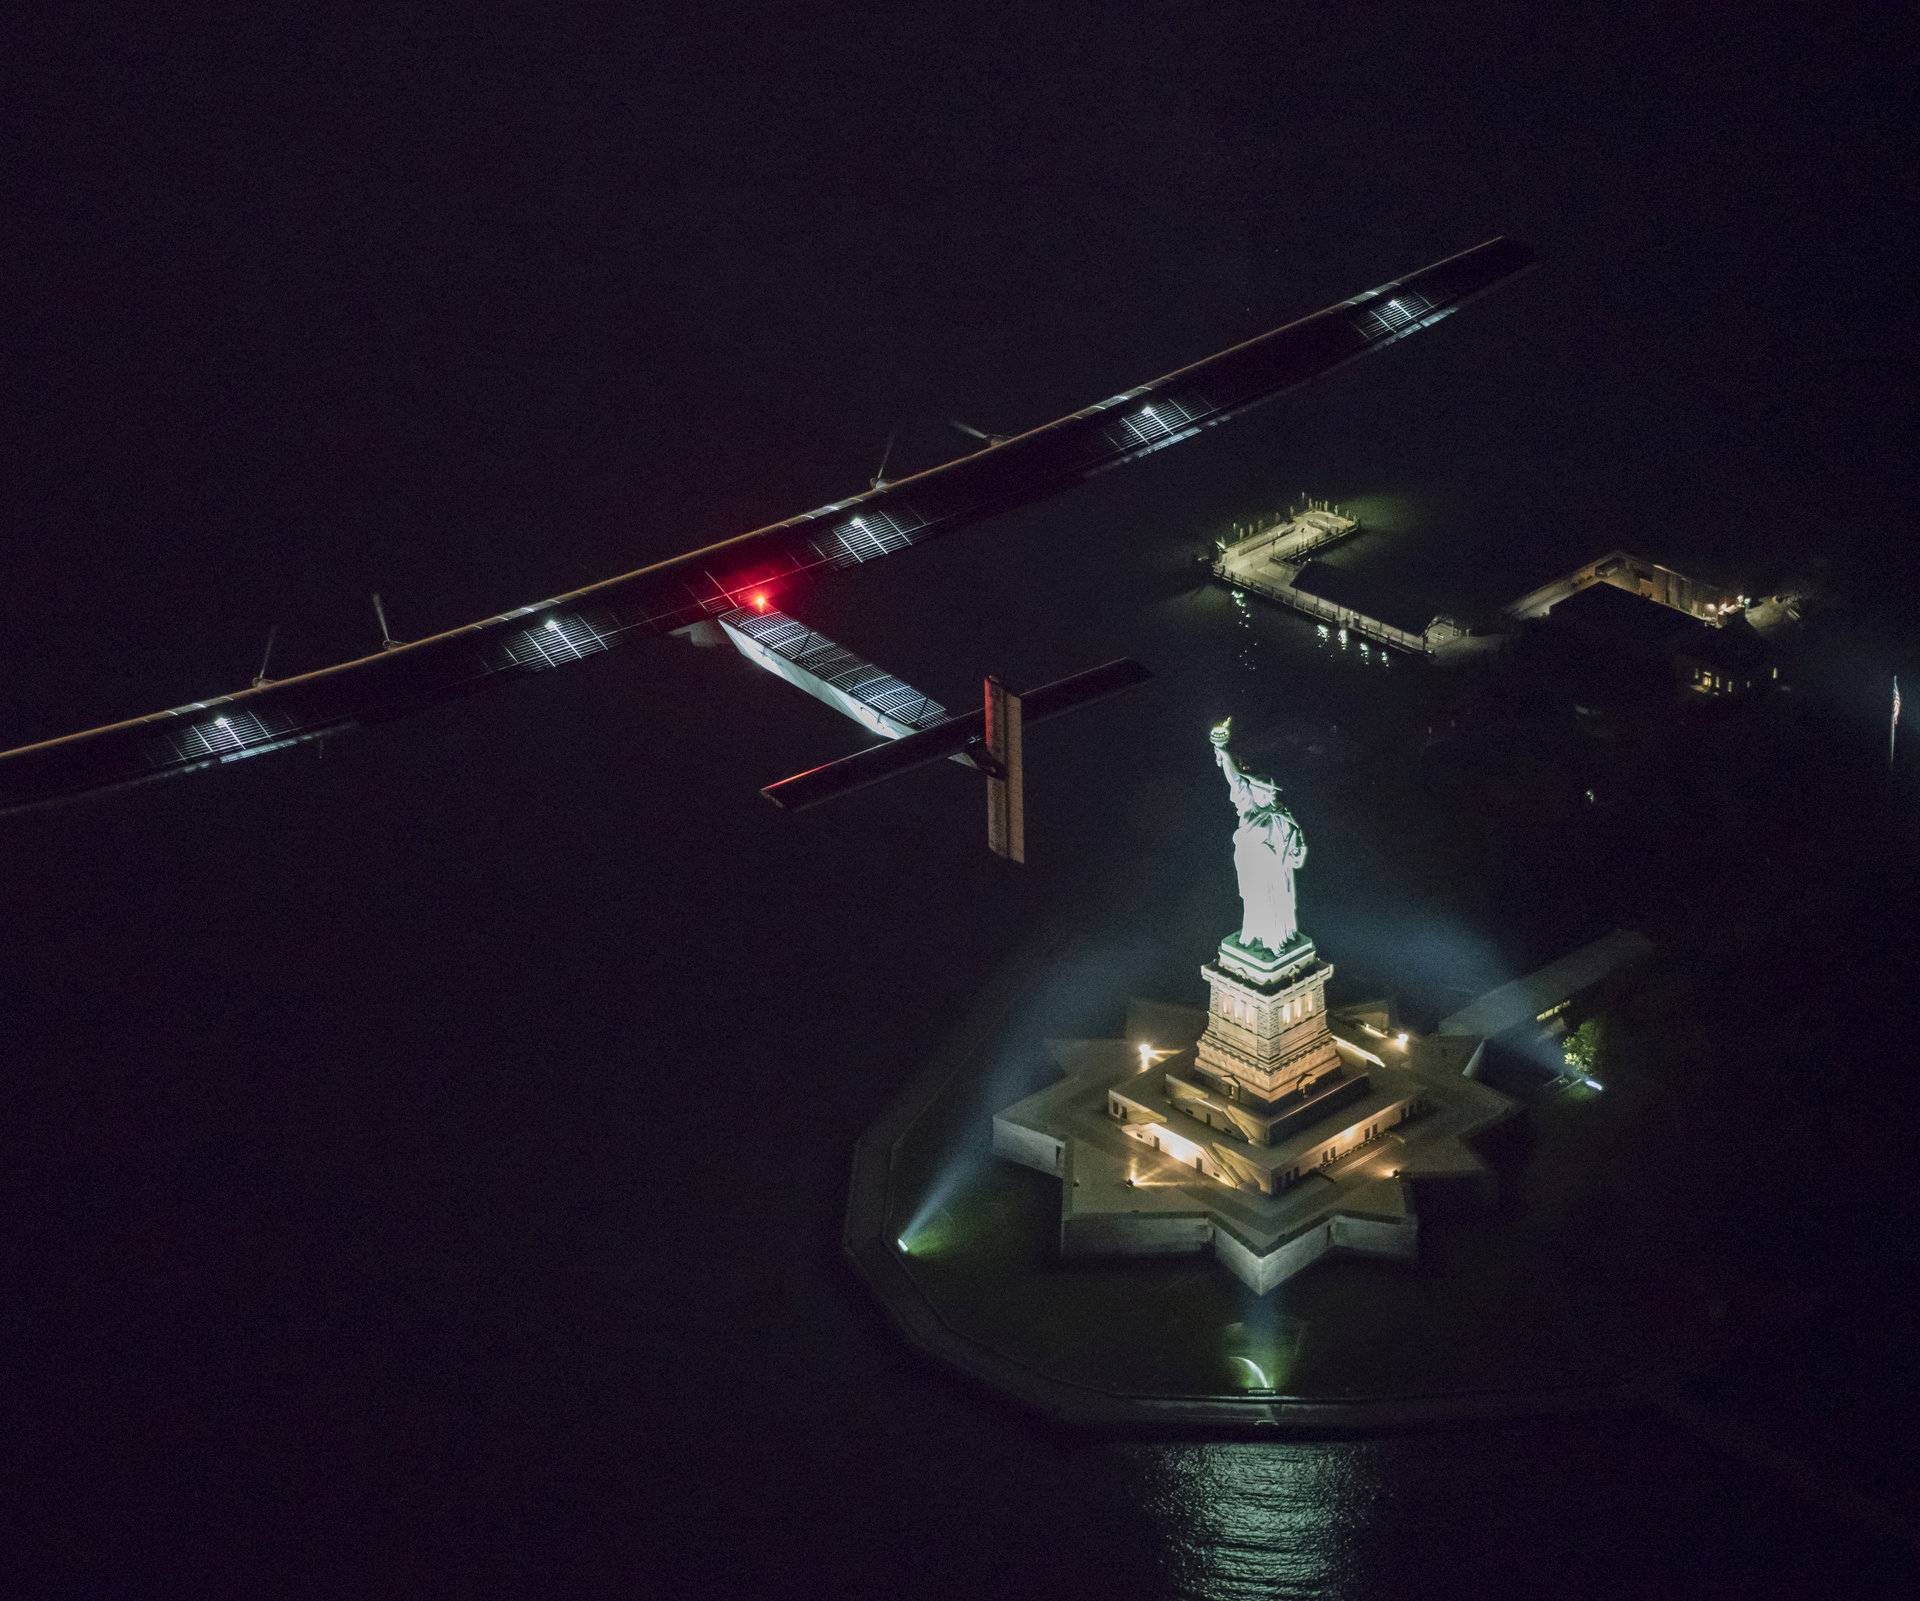 Solar Impulse 2, the solar airplane, piloted by Swiss adventurer Andre Borschberg, flies over the Statue of Libery in in New York, shortly before landing at John F. Kennedy airport